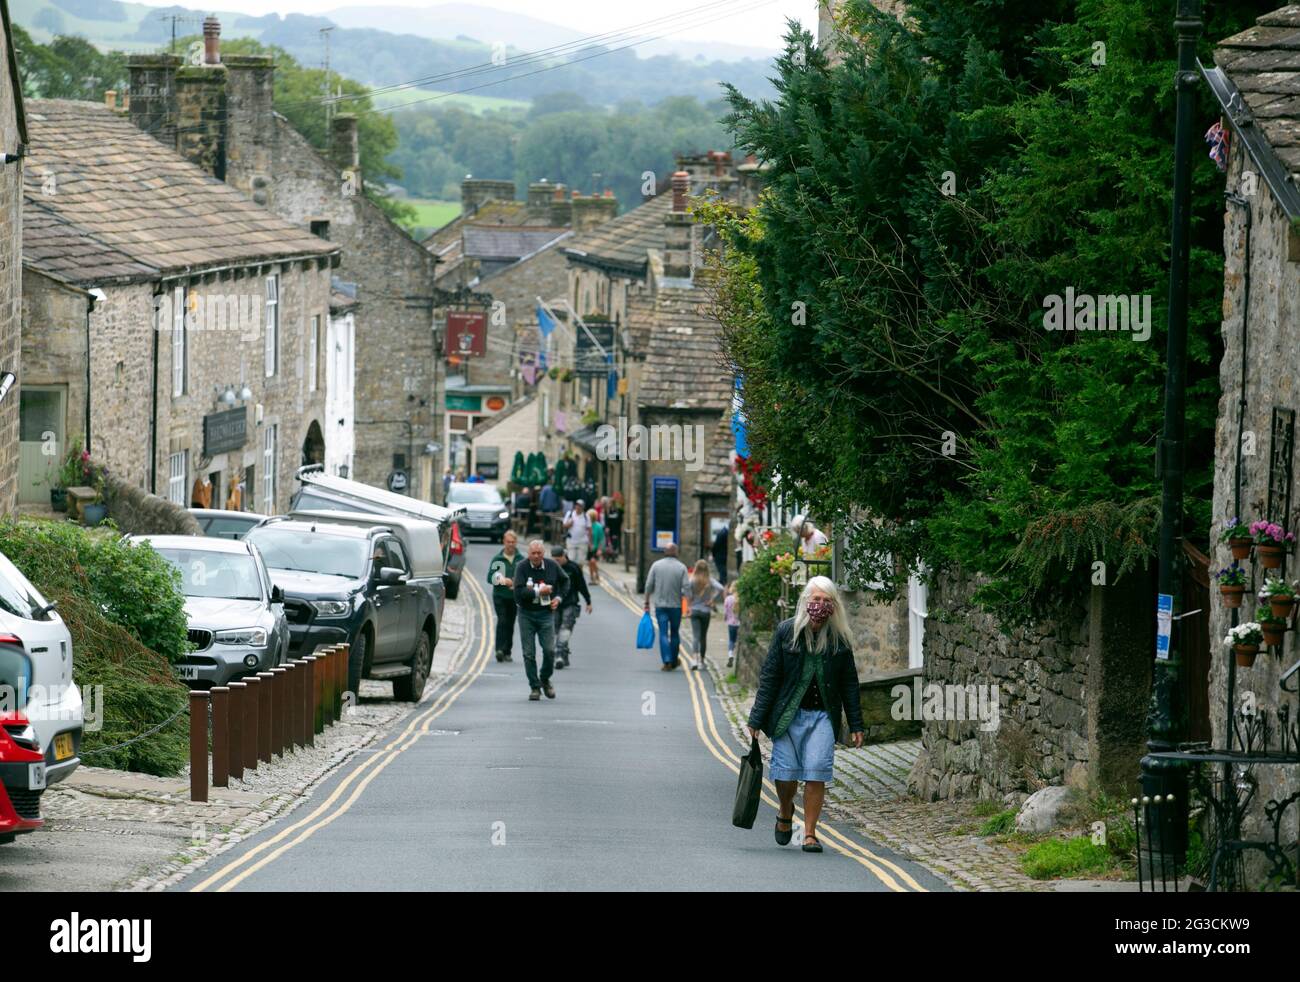 People walk up the streets of Grassington in the Yorkshire Dales. The town has recently been used to film the new series of the classic TV series All Stock Photo